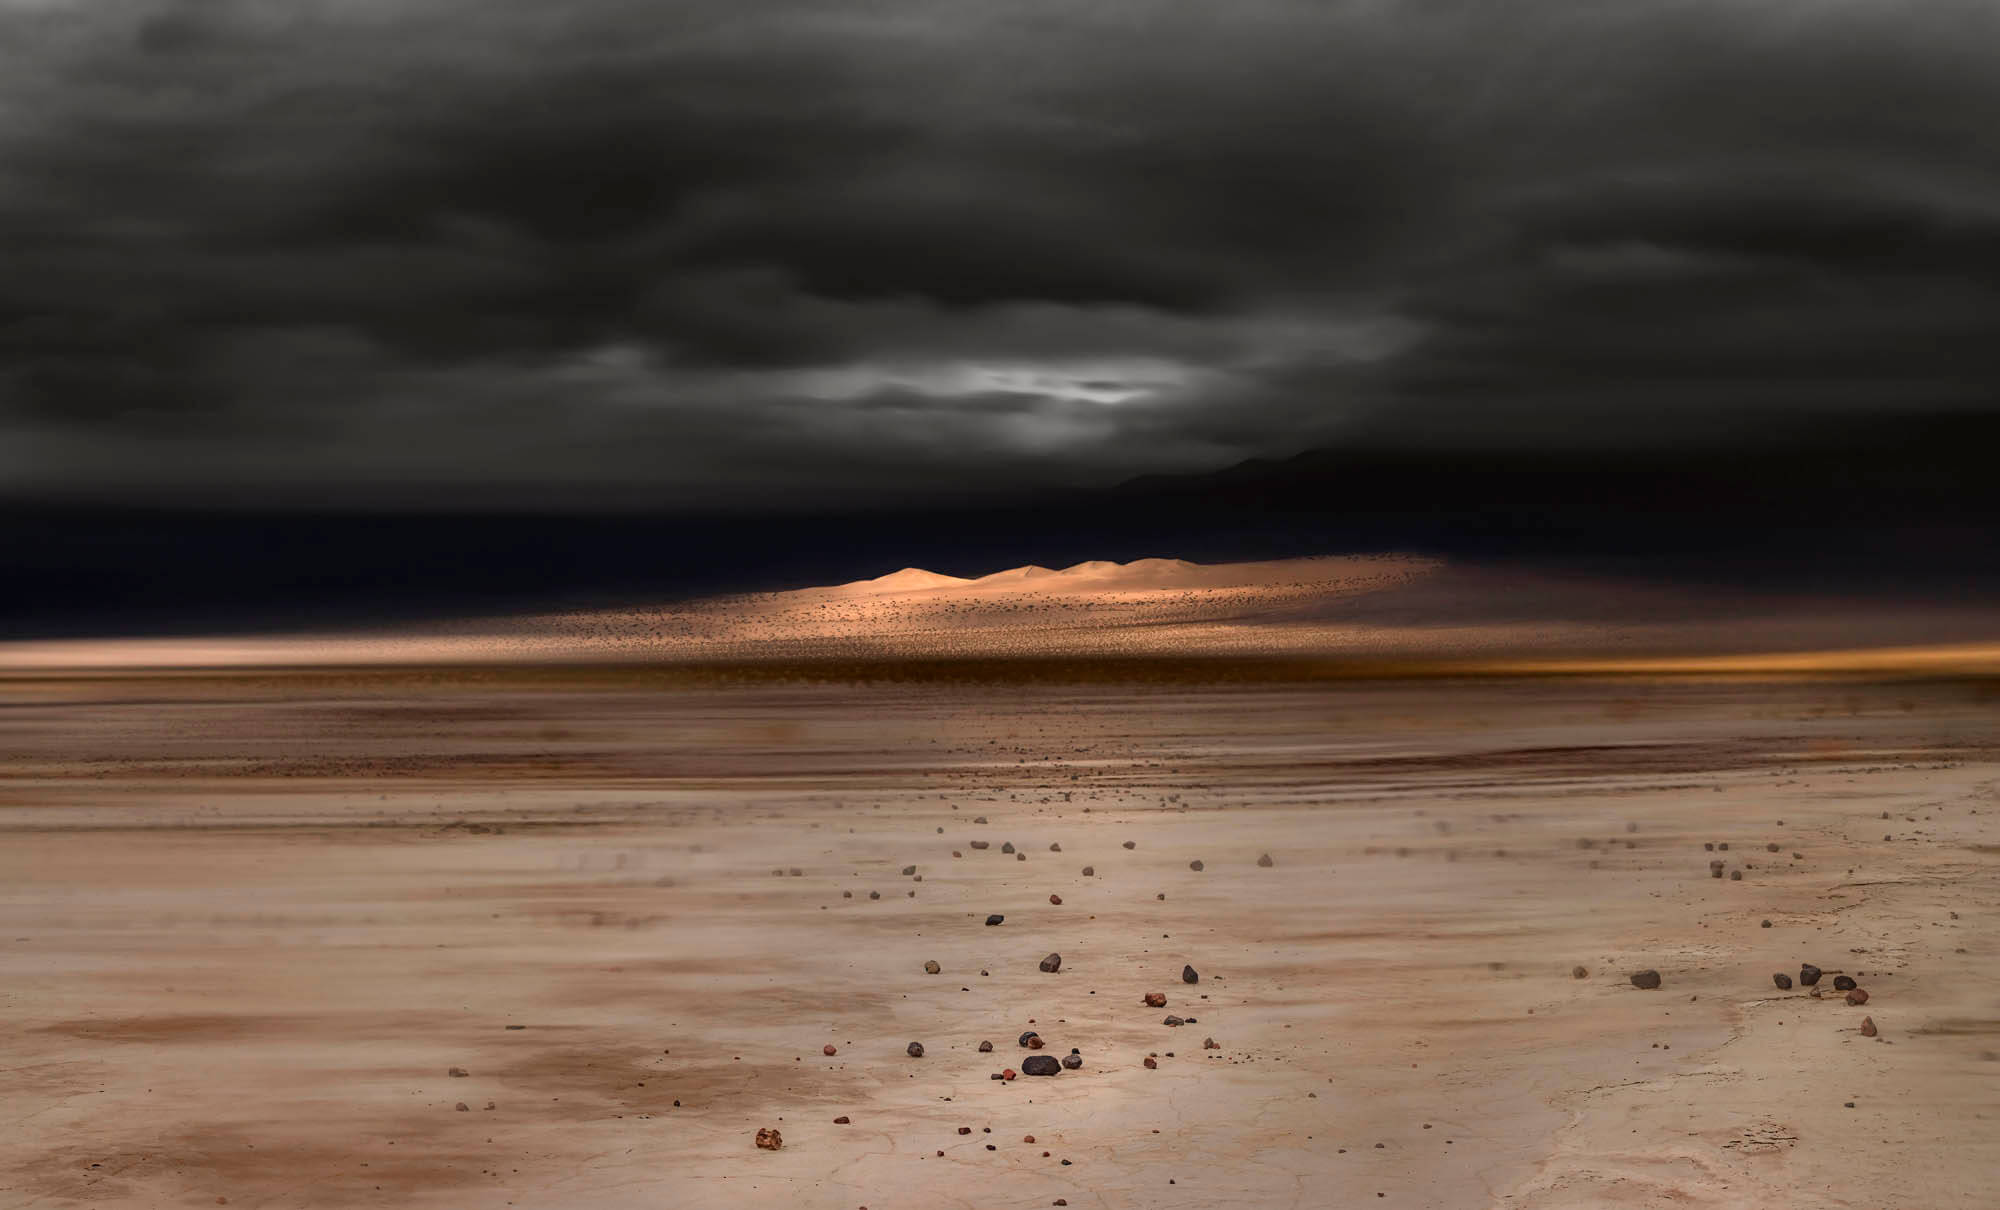 Painted Landscape example image of a sunset with storm clouds - By Brian Kaufman